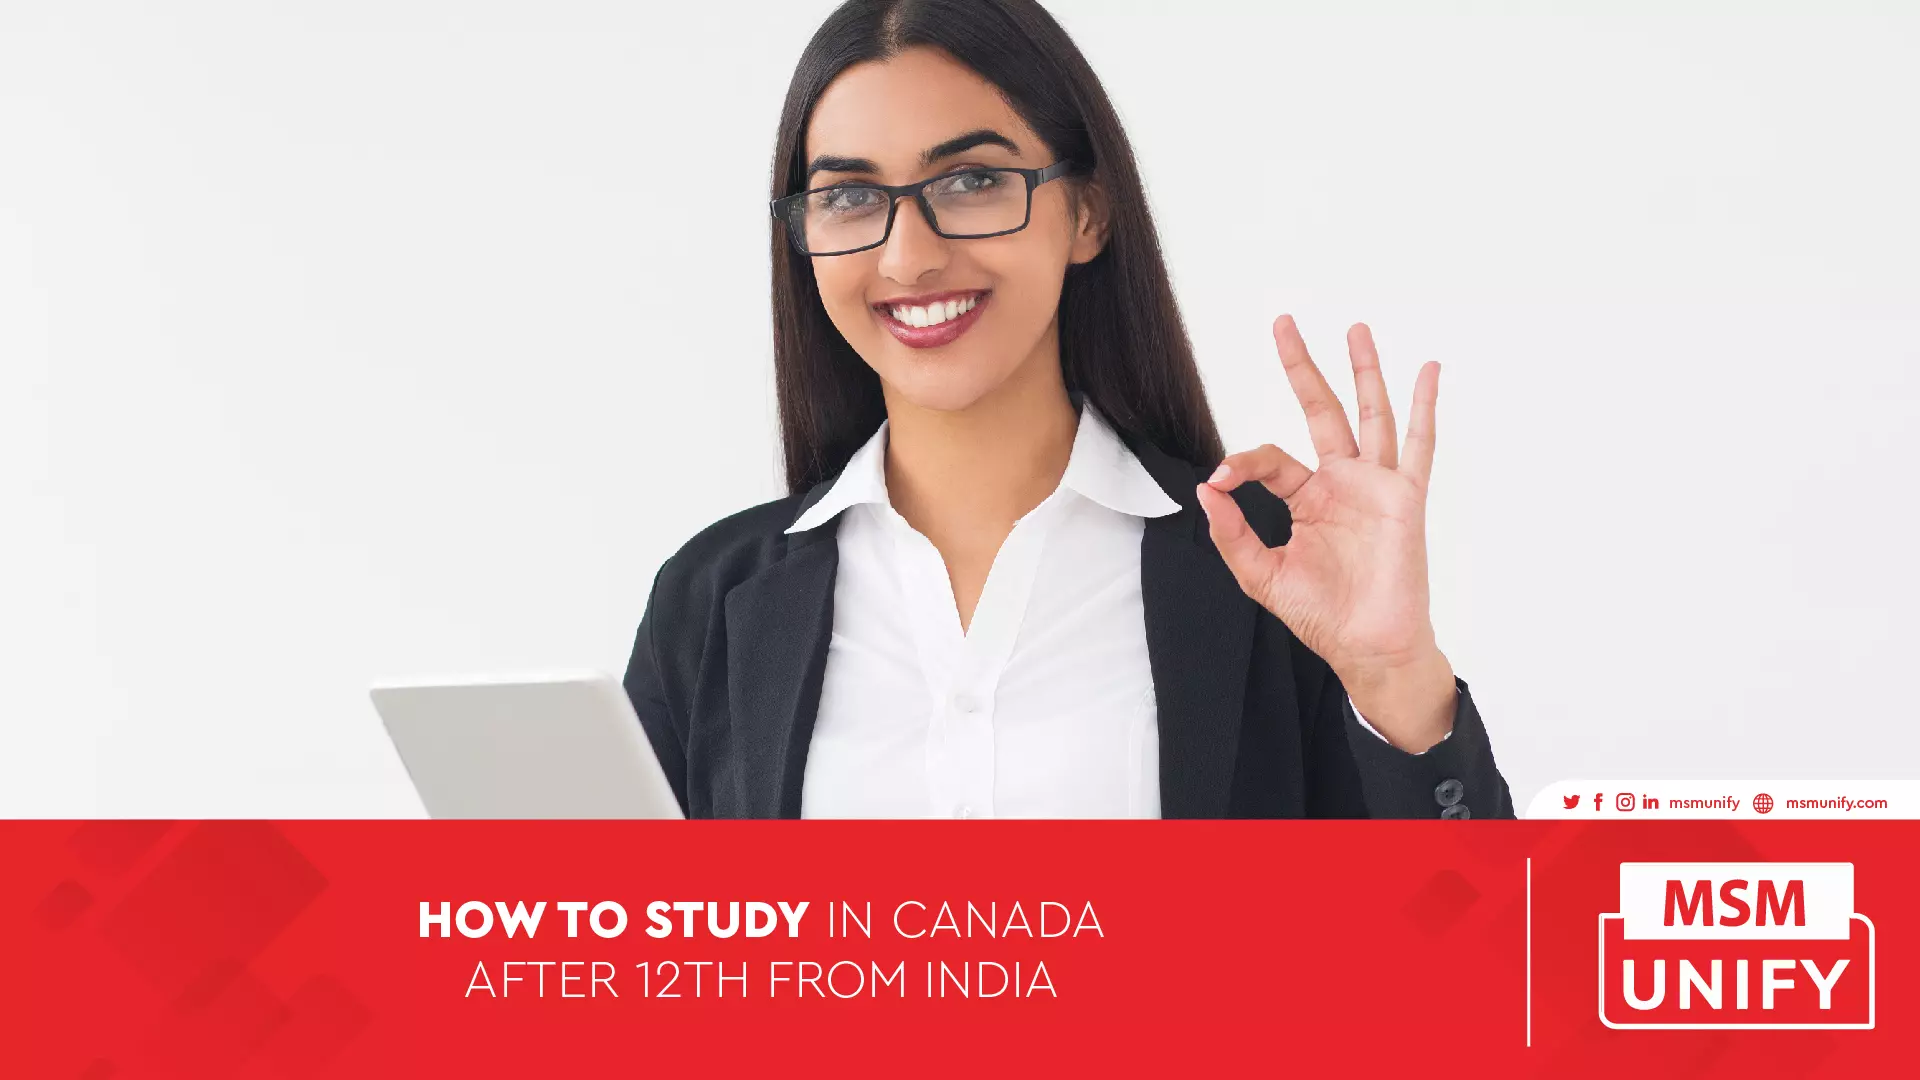 112222 MSM Unify How to Study in Canada After 12th from India 01